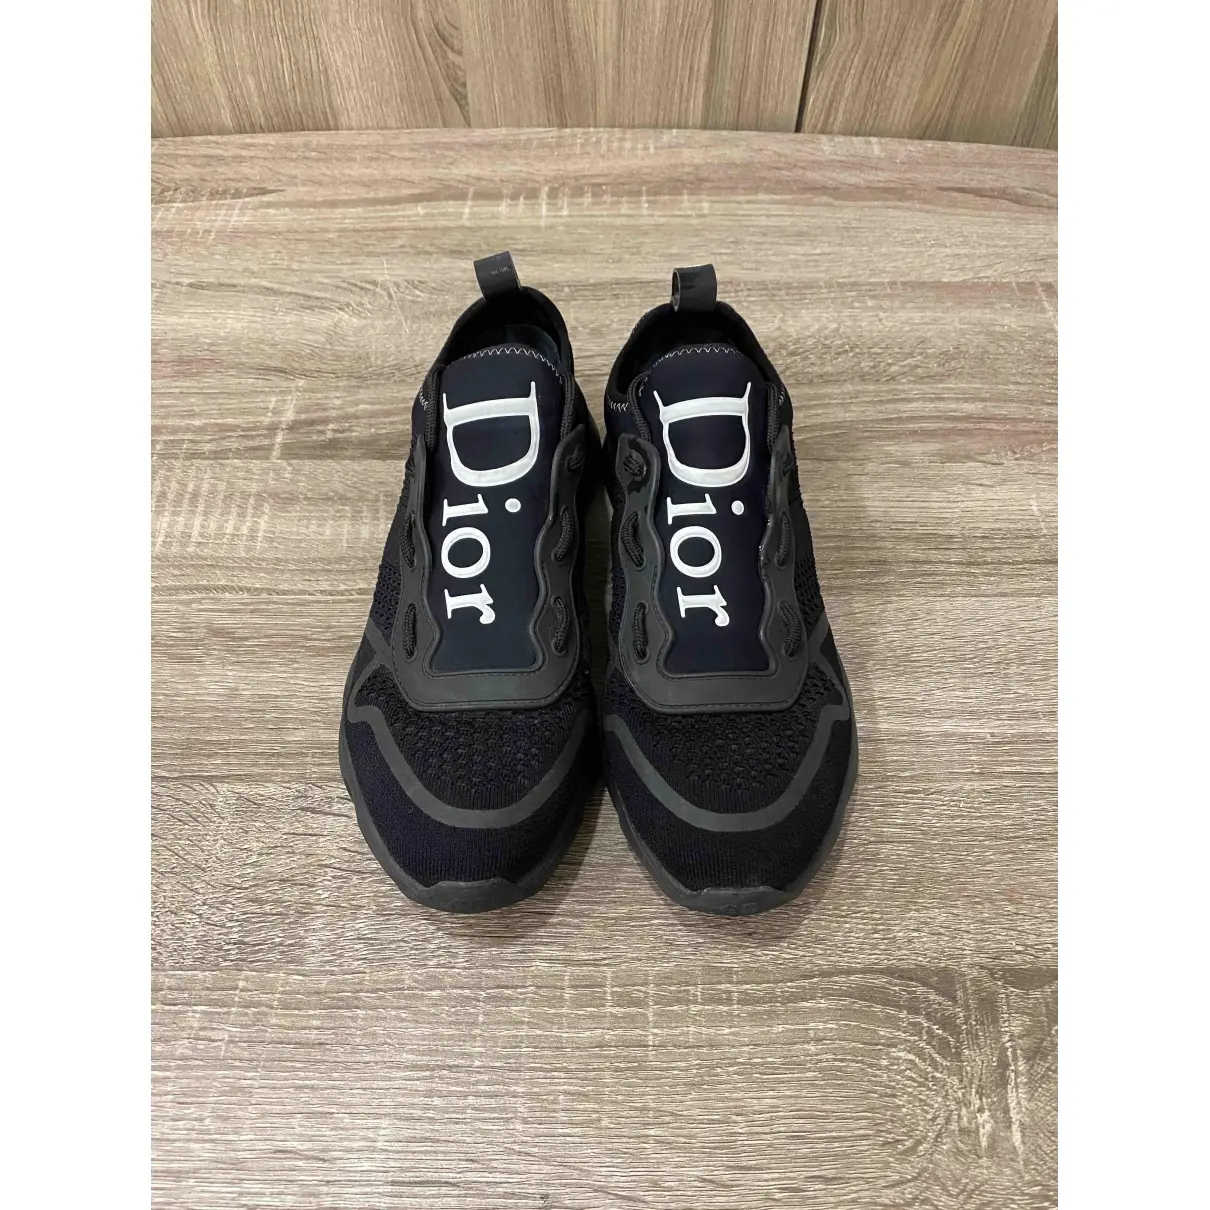 Buy Dior Homme B21 Neo low trainers online